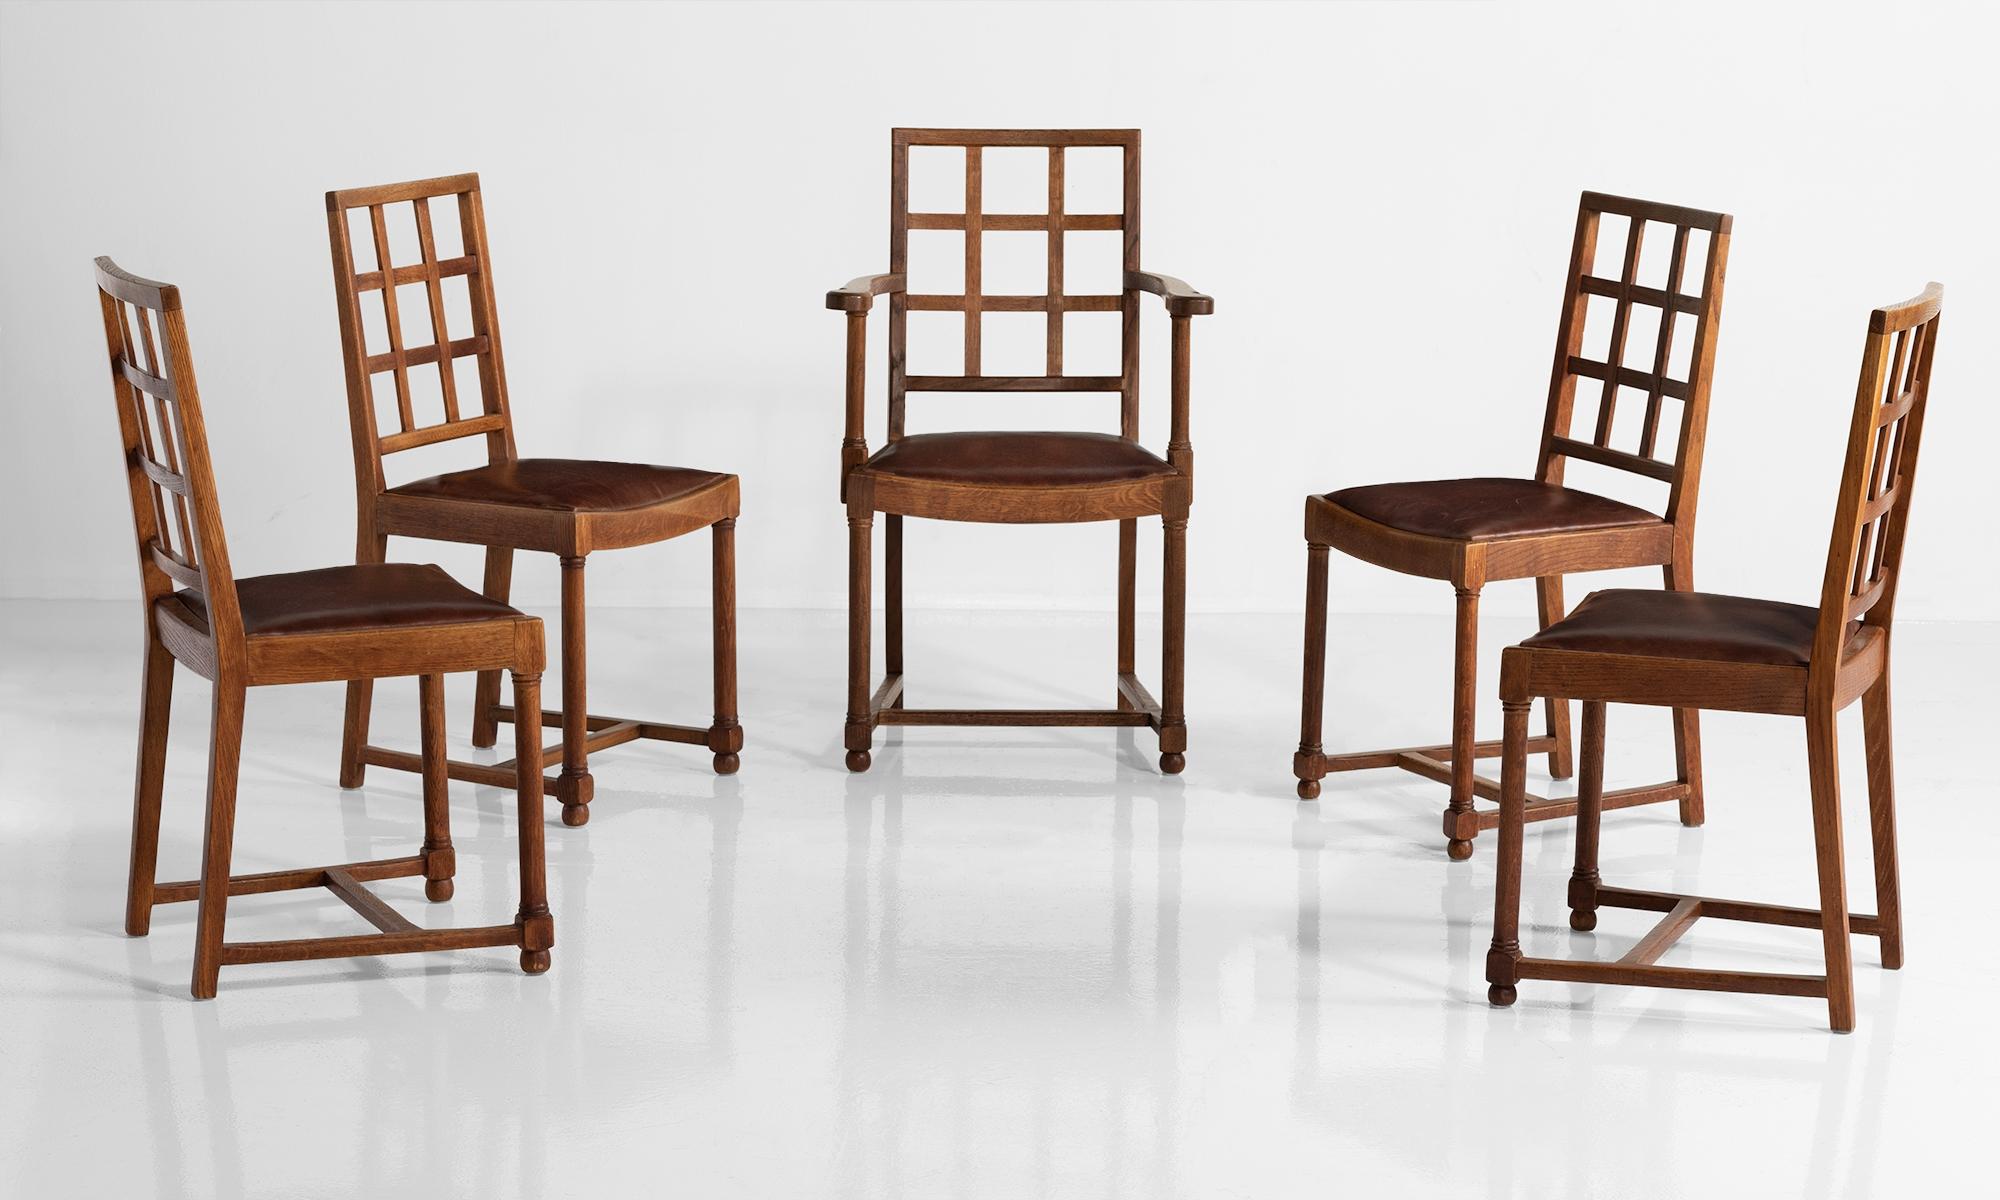 Set of six heals dining chairs, England circa 1930.

Solid oak chairs made by Heals of London, with original leather upholstered seat pads with lattice back.